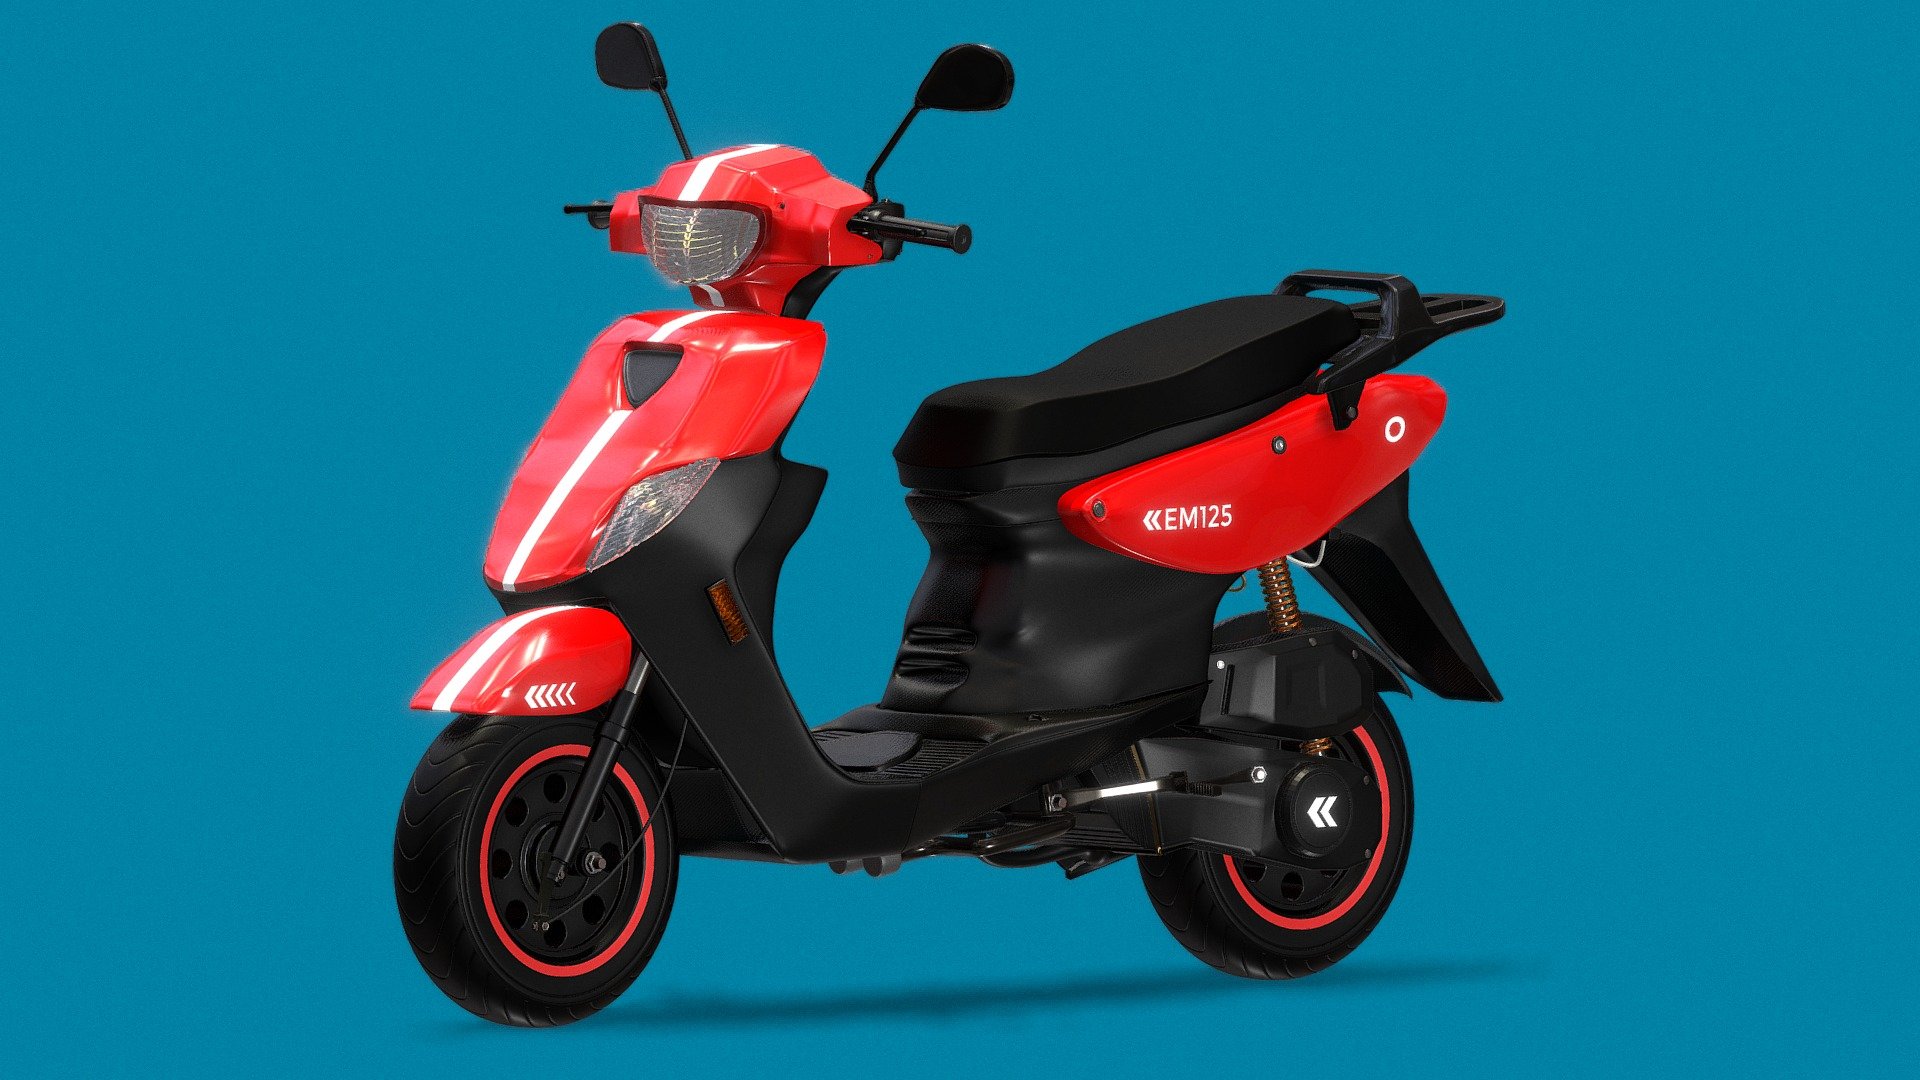 This is my best 3D model yet, i hope to get better by practicing and making some other models.

Hope you like it or it helps in someway.

Based on a 125cc called d125.

Blender Render:


More Renders of the model: Here - 125cc Scooter - Motorcycle - Download Free 3D model by Diego G. (@empty_mirror) 3d model